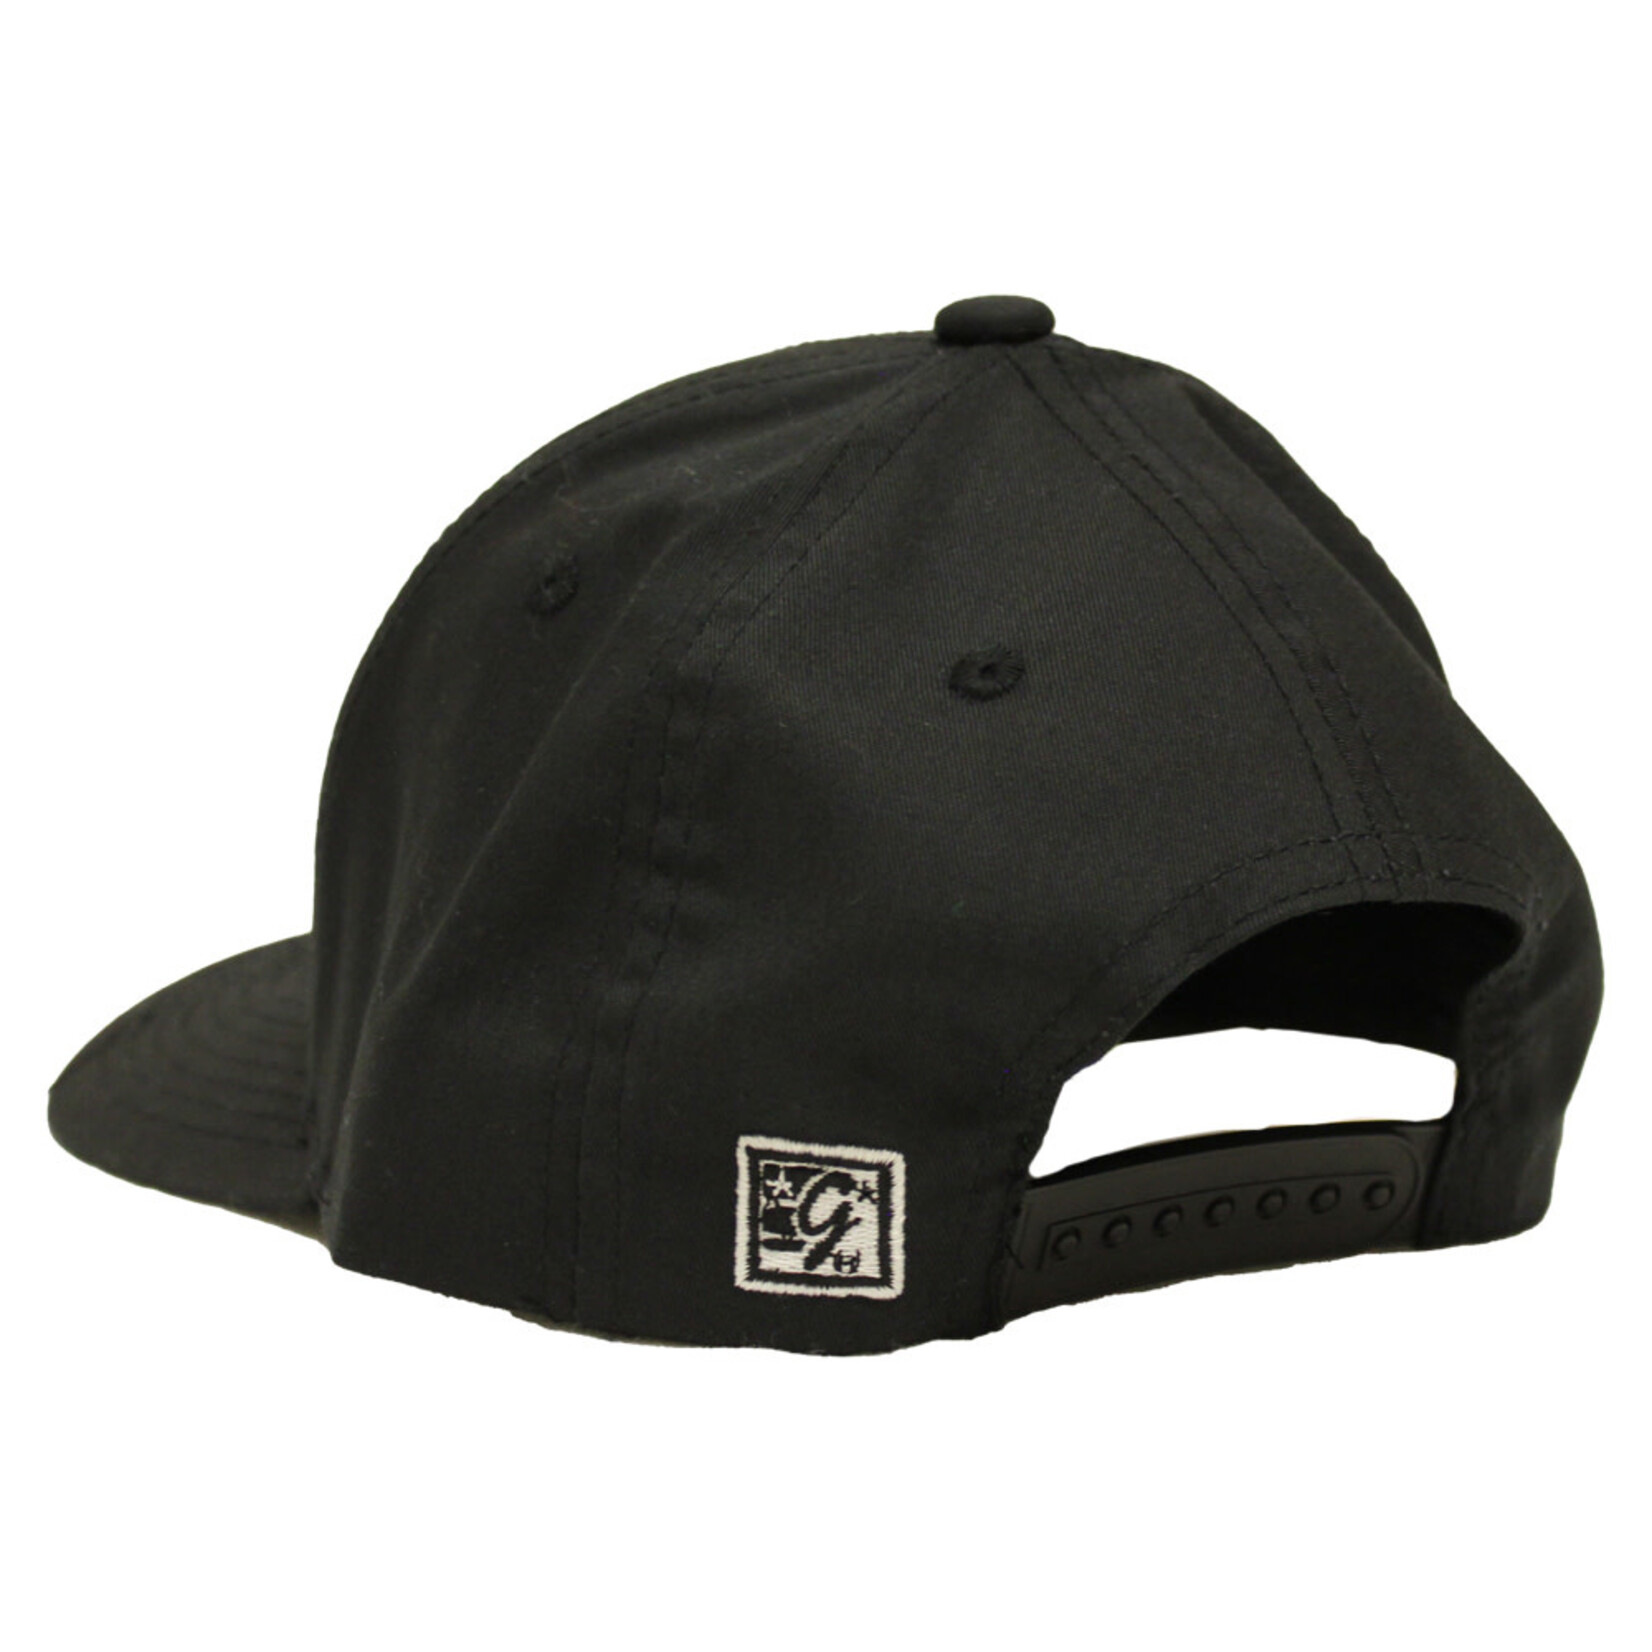 The Game The Game Hockey Youth Twill Snapback